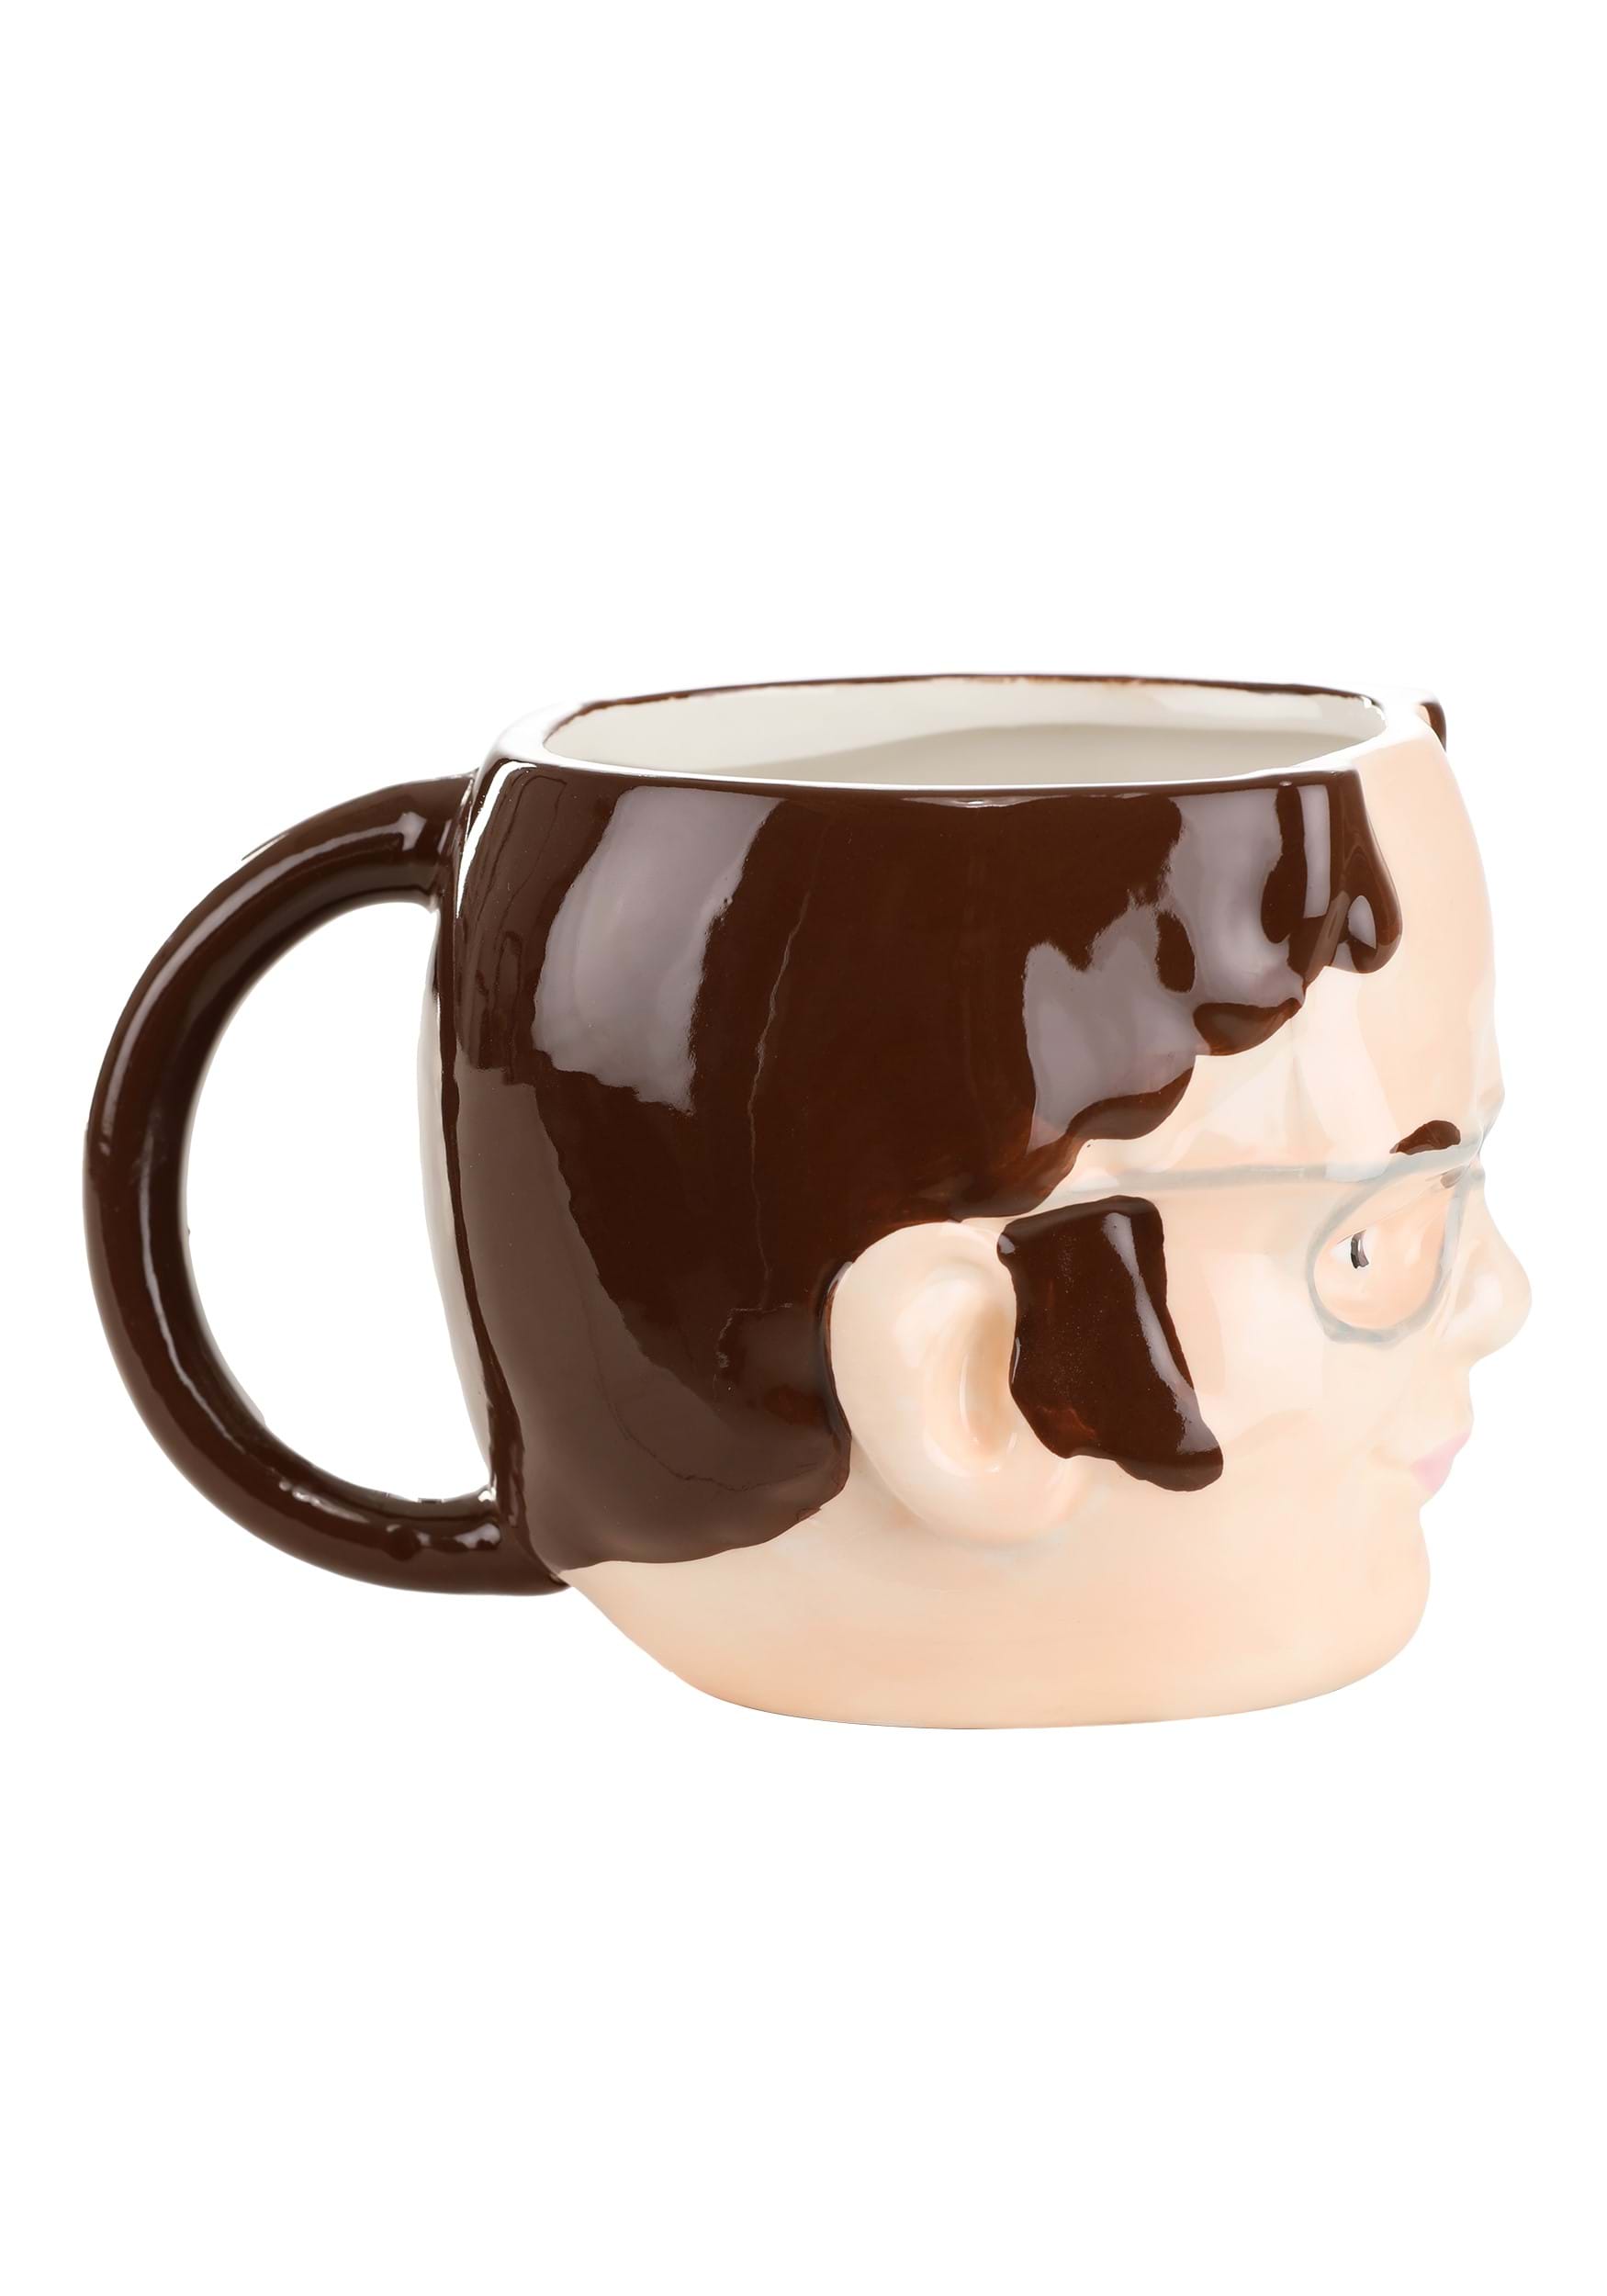 Dwight - I am manager mug - The Office Gear